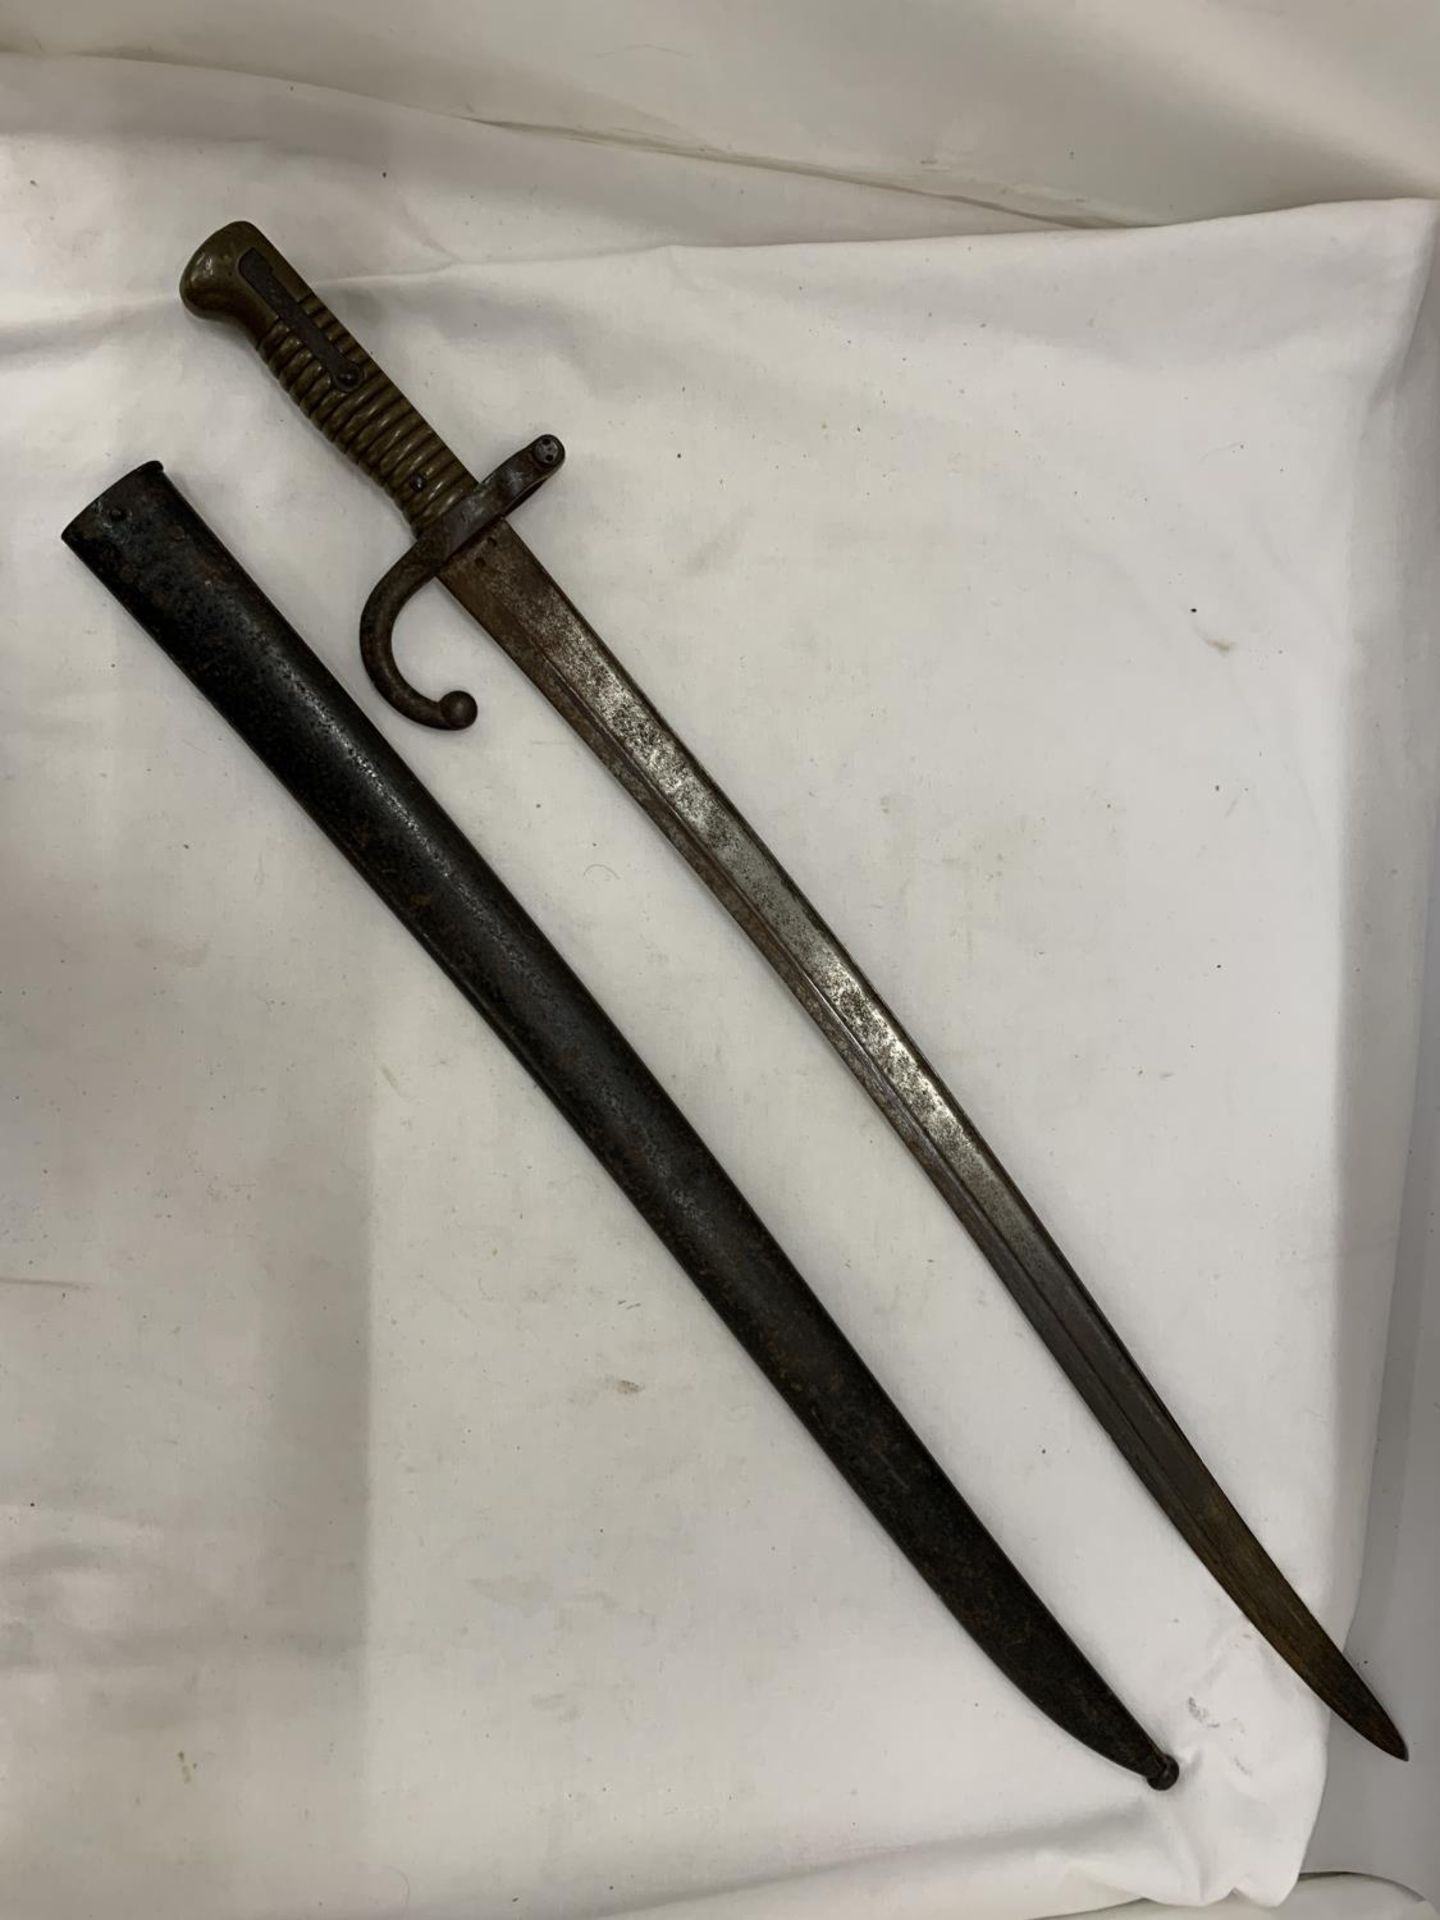 A FRENCH, 1866, CHASSEPOT SWORD/BAYONET - Image 4 of 6